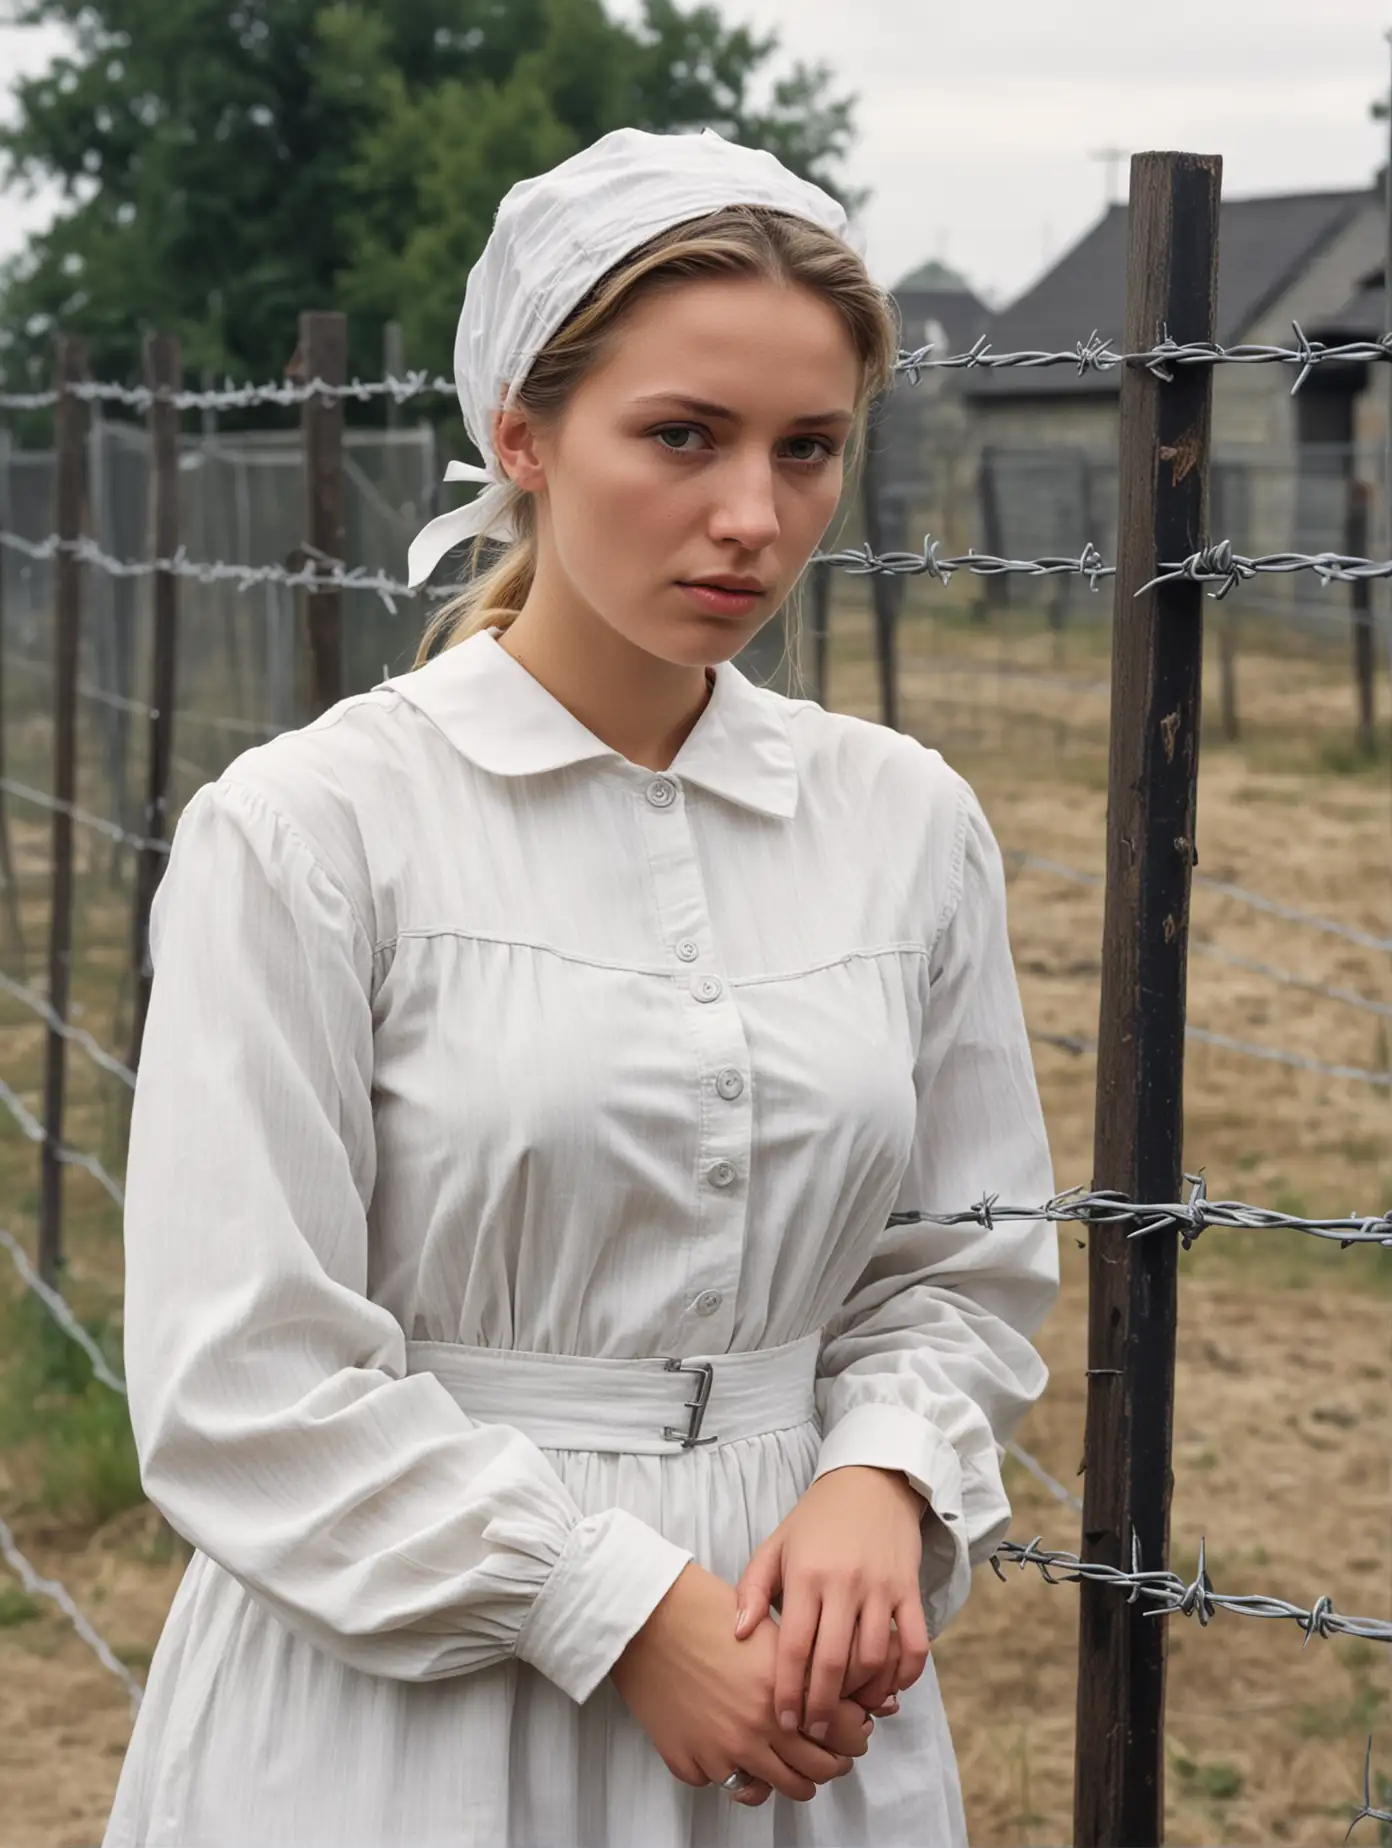 A busty female prisoner (german, 18 years old) stand along the fence in a prisonyard (barred fence with barbed wire, 1900s) in clean white buttoned longsleeve dress(short bonnet), head to knee view, they are sad and desperate